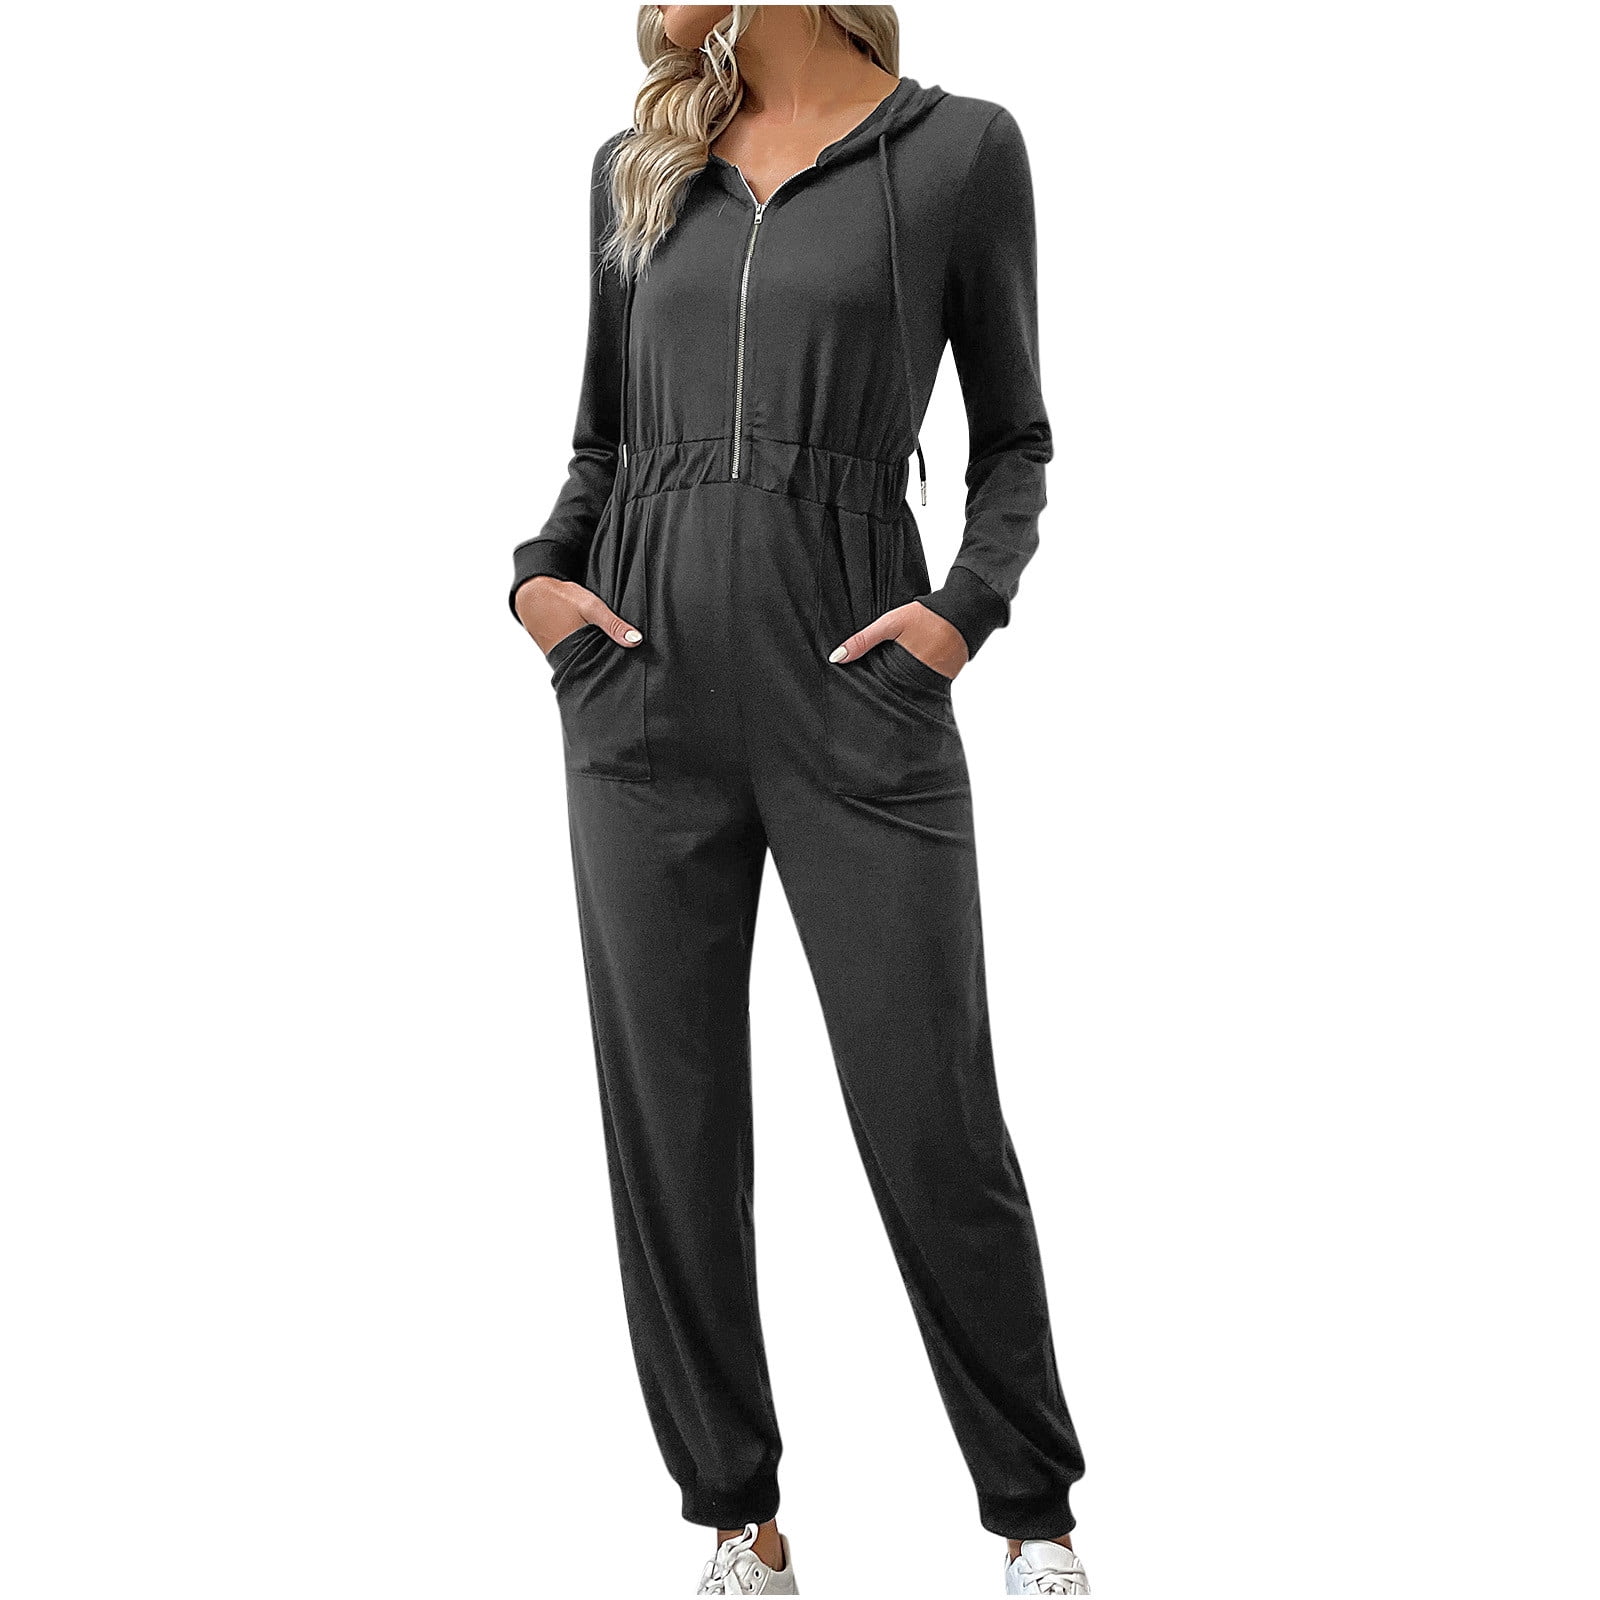 Buy Black Jumpsuits &Playsuits for Women by Magnetic Designs Online |  Ajio.com